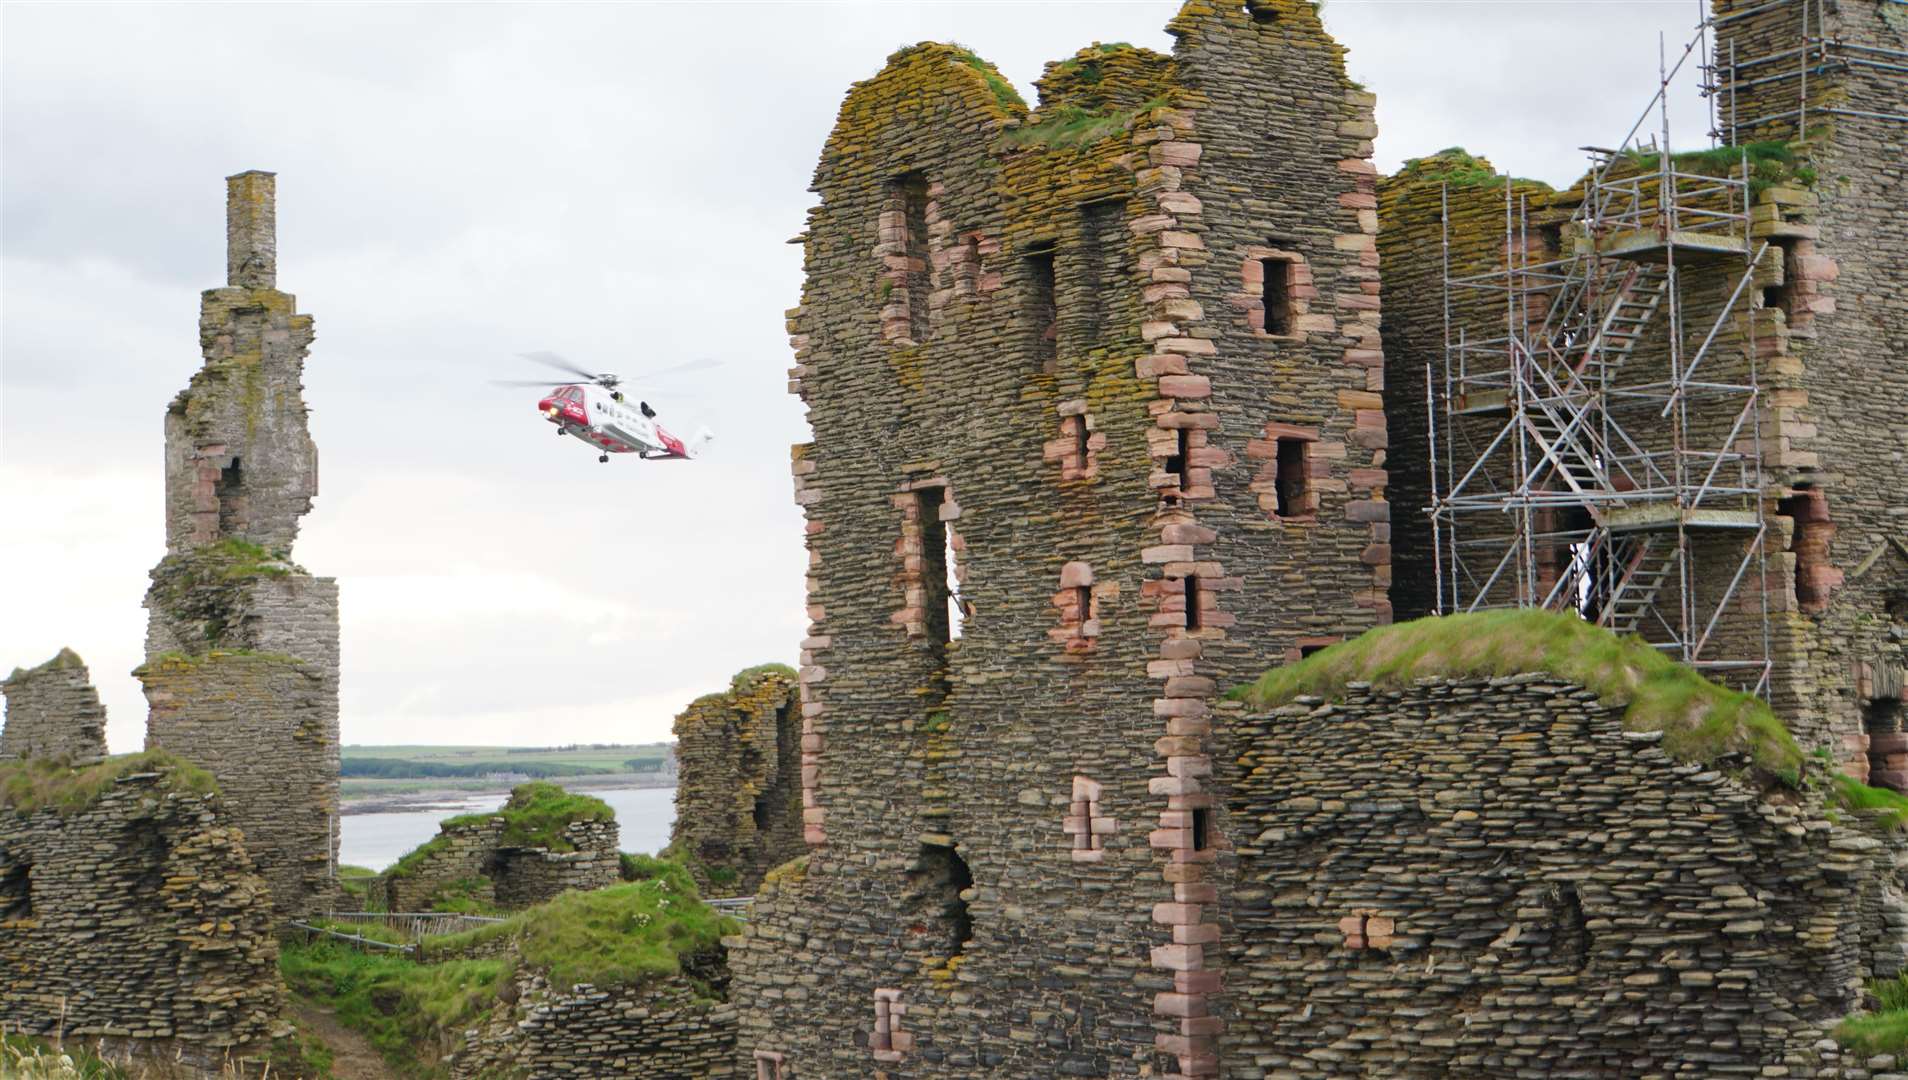 The coastguard helicopter hovers above the injured boy near the ruined castle at Noss Head by Wick. Picture: DGS